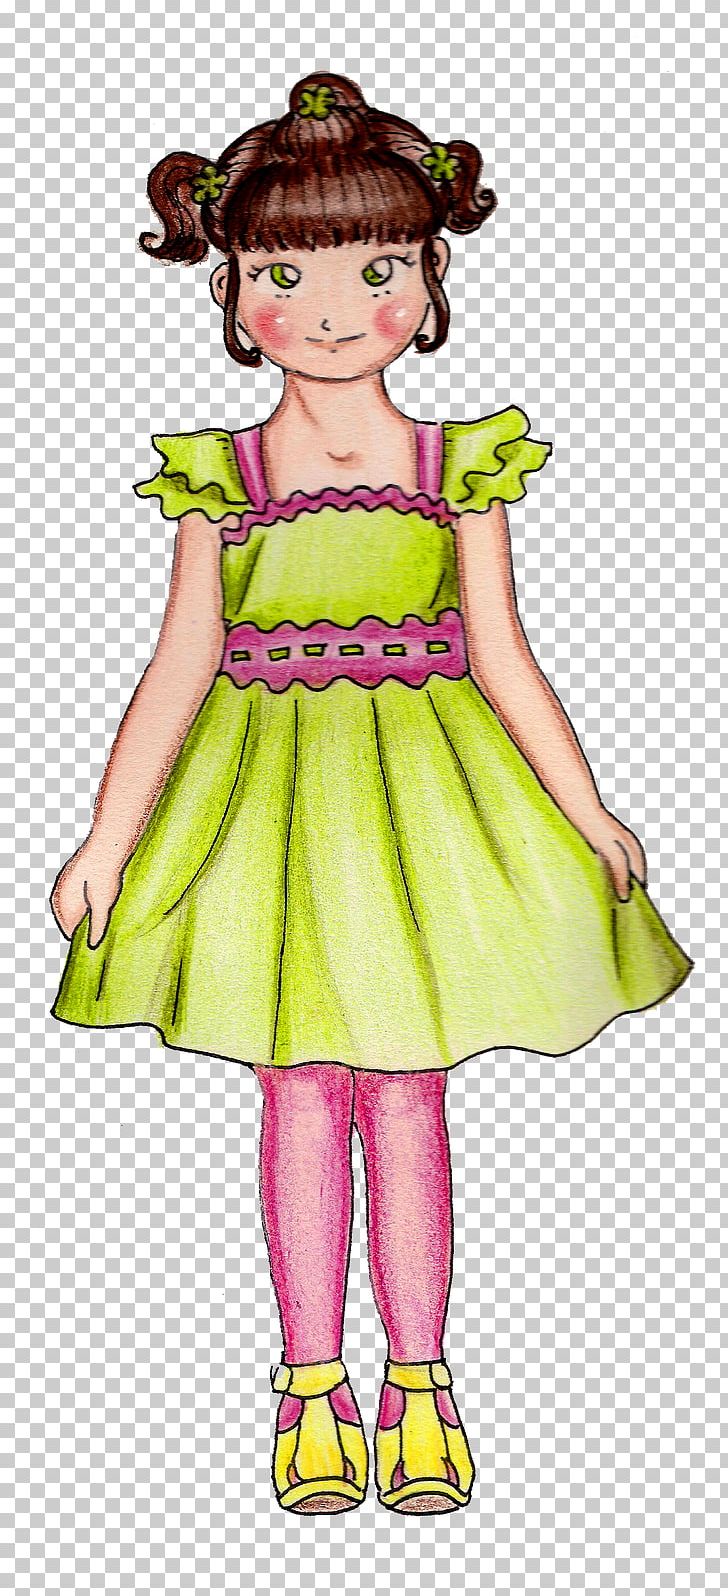 Toddler Dress Fairy Green PNG, Clipart, Animated Cartoon, Art, Child, Clothing, Costume Free PNG Download